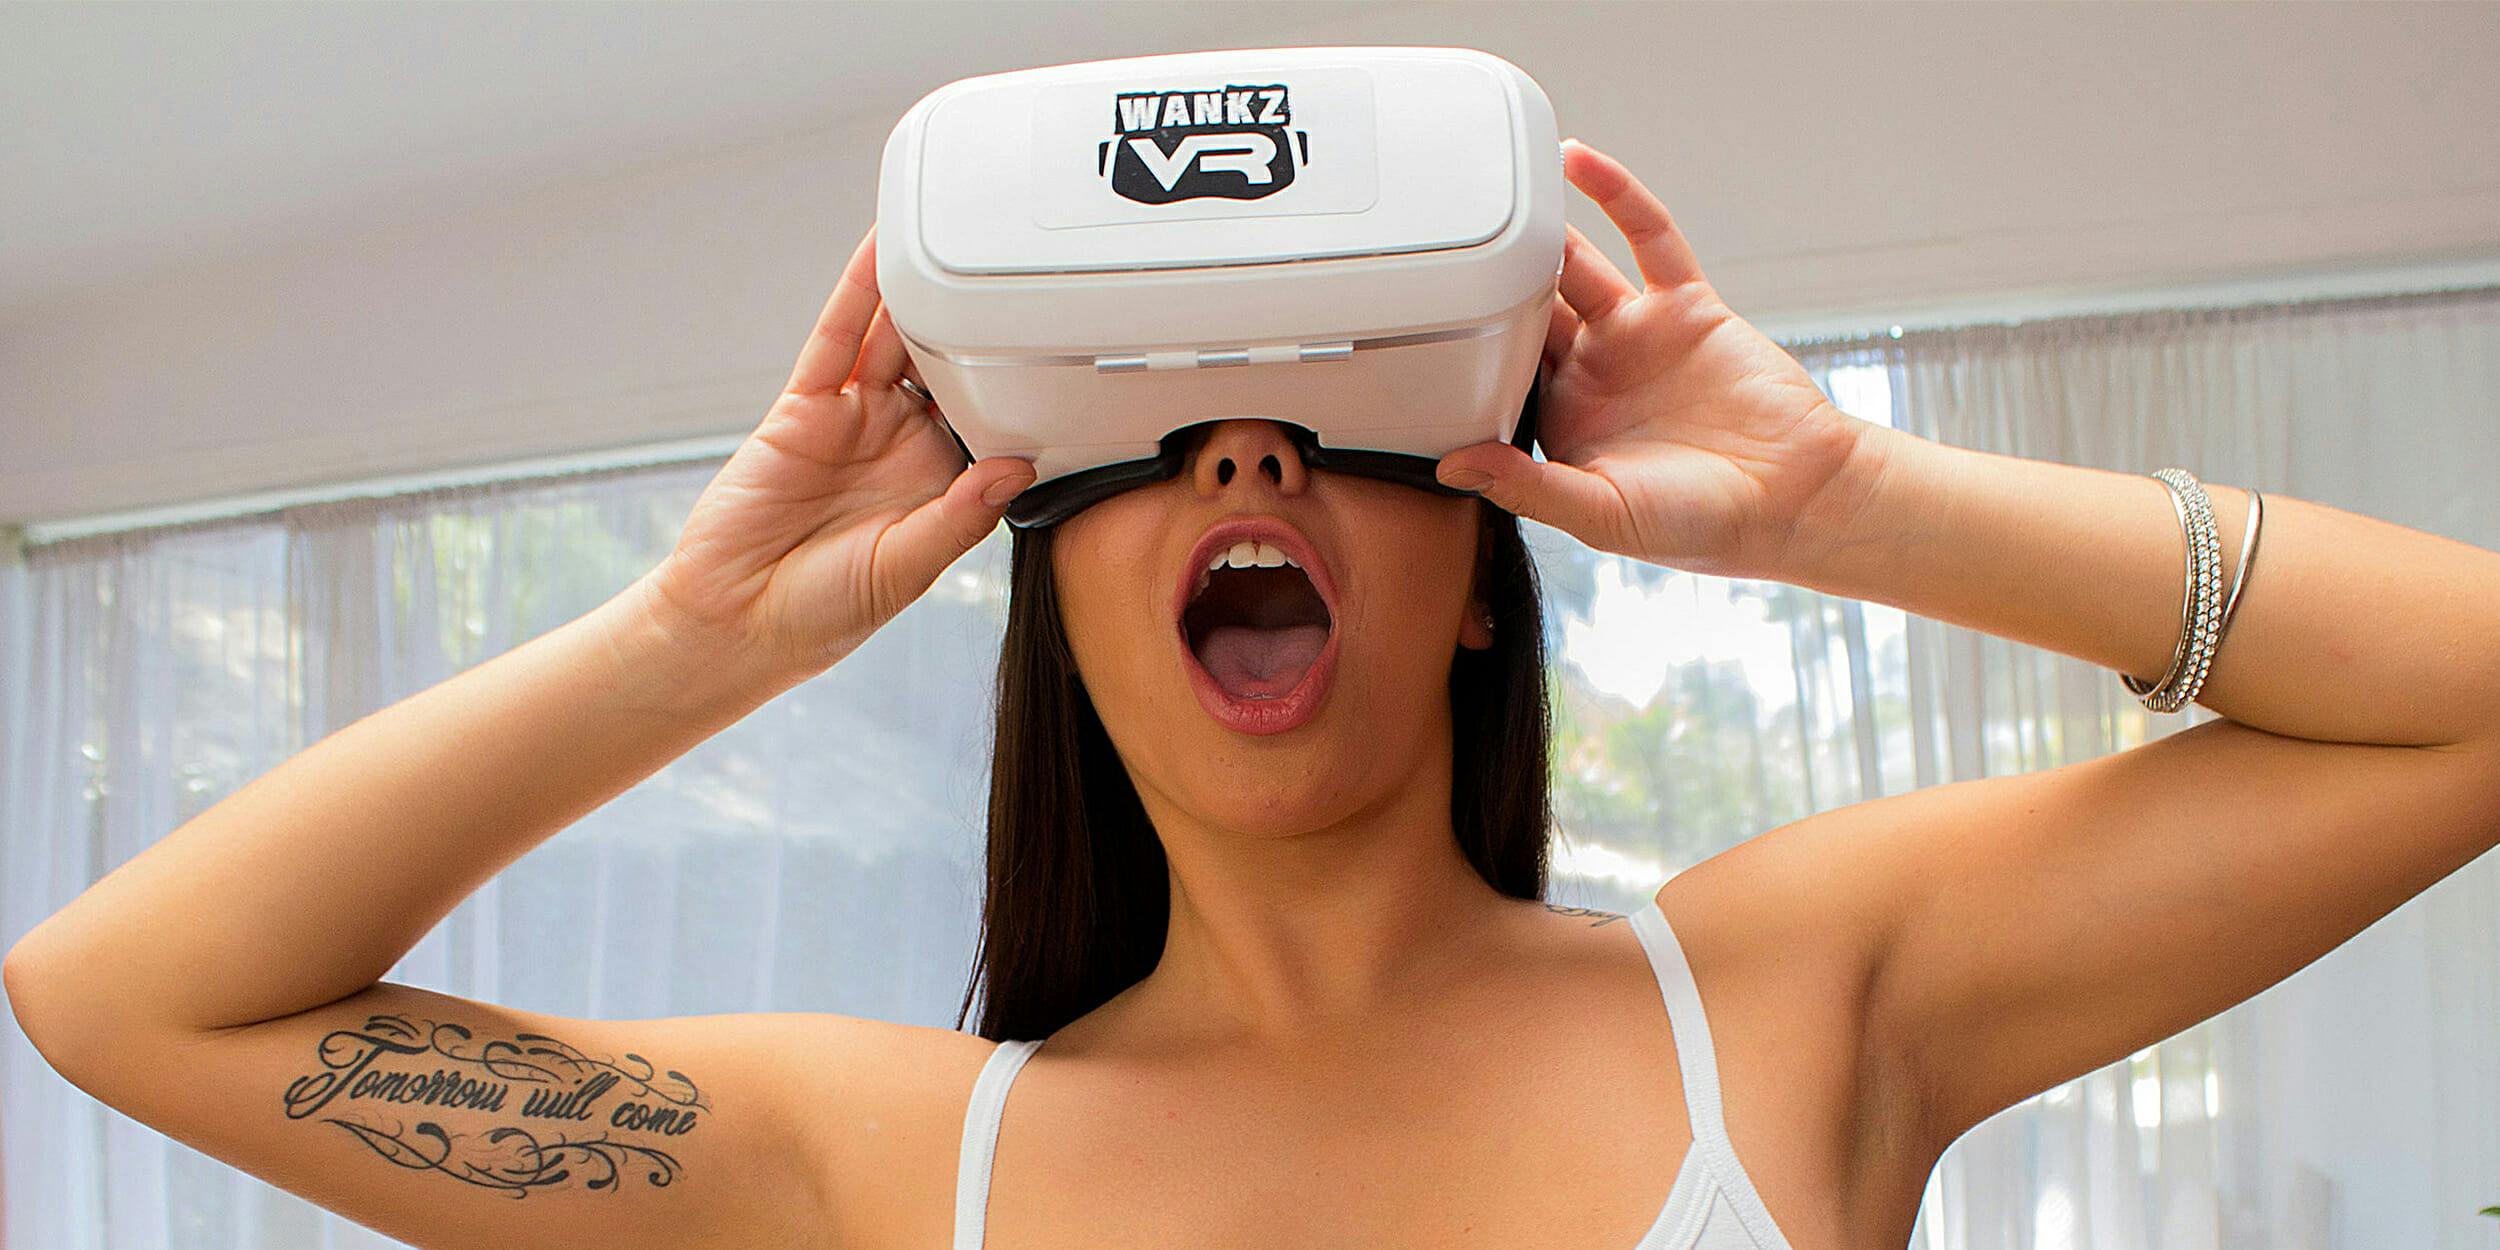 Wankz VR is releasing more porn than you can handle